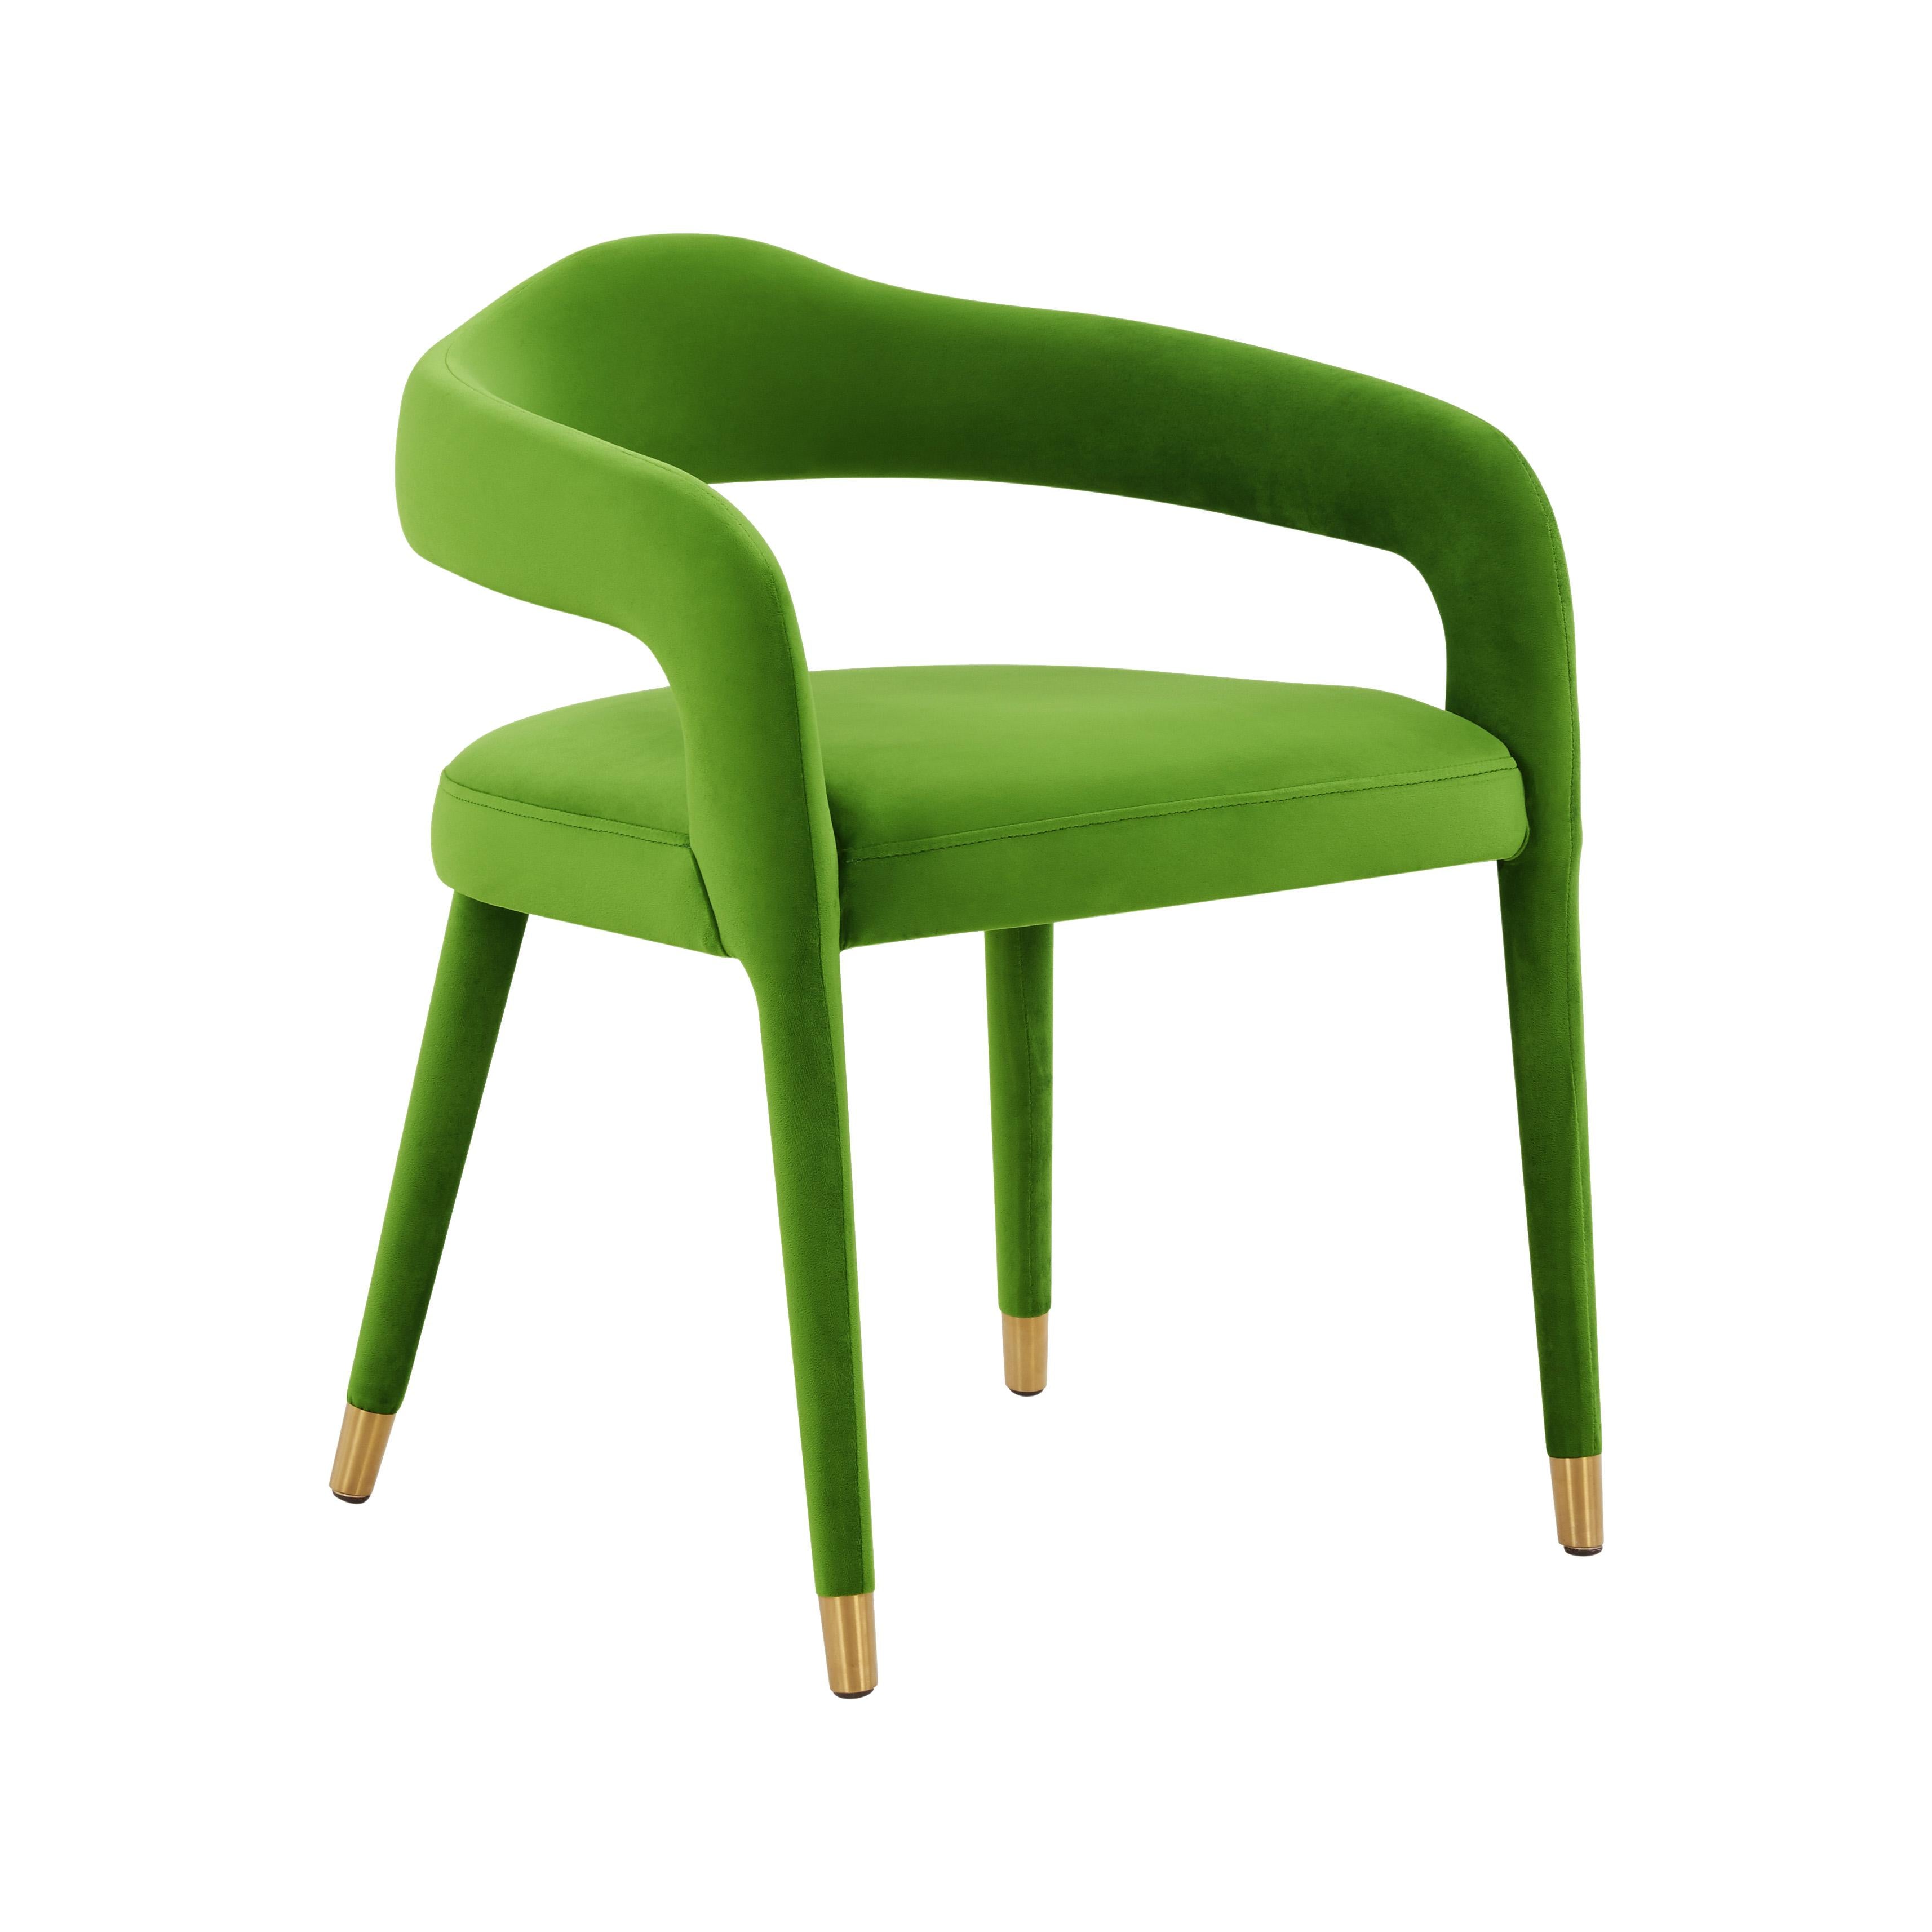 Tov Furniture Dining Chairs - Lucia Green Velvet Dining Chair